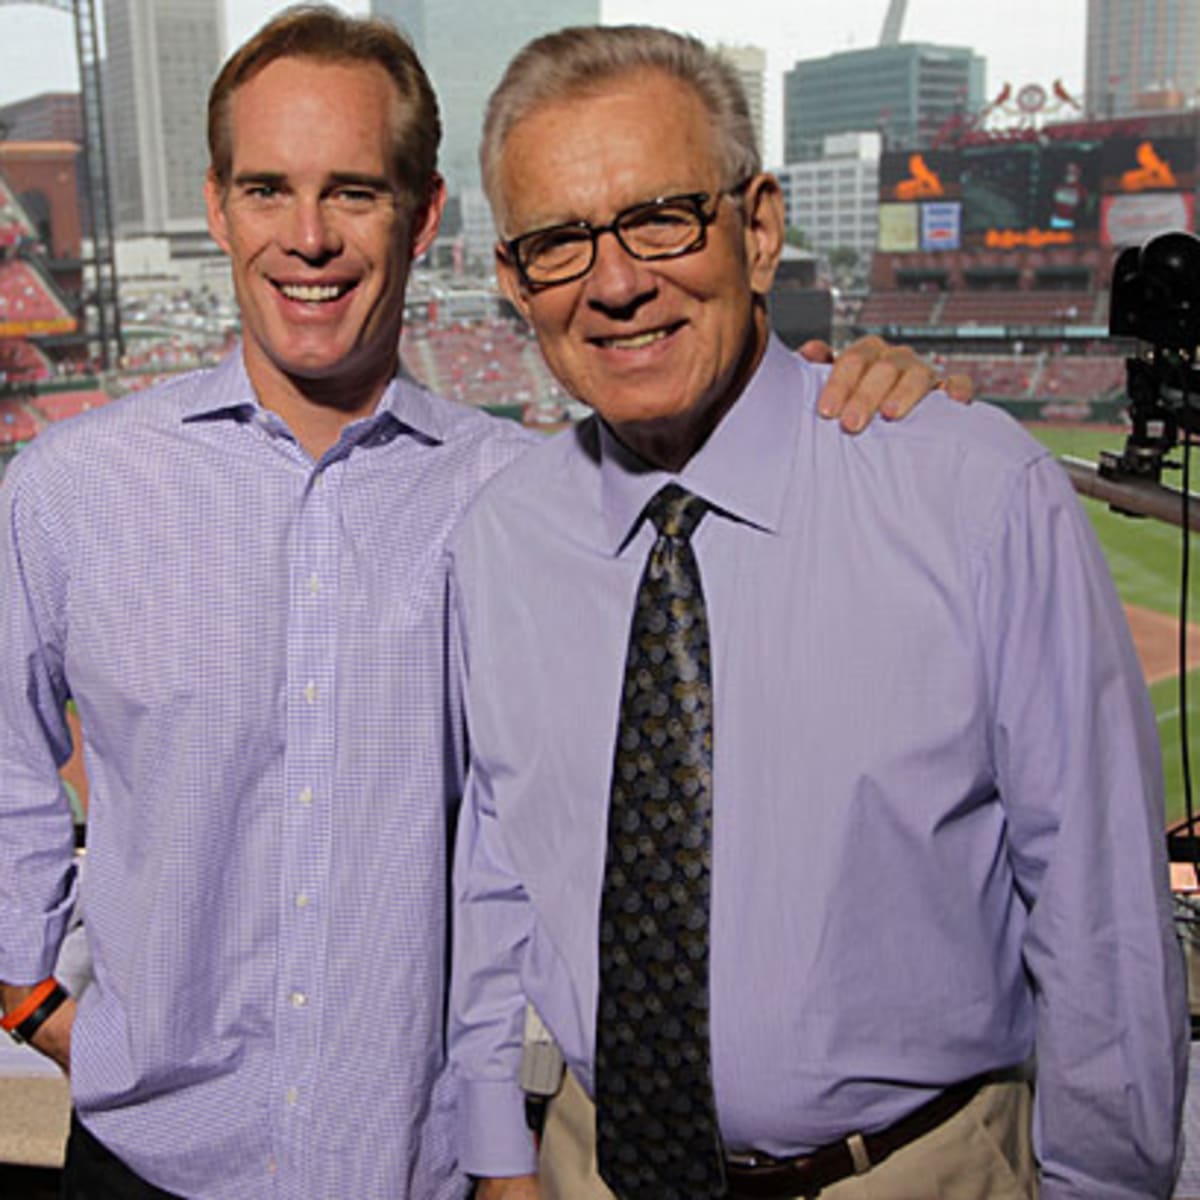 Tim McCarver on 1980 Phillies, today's game, his future